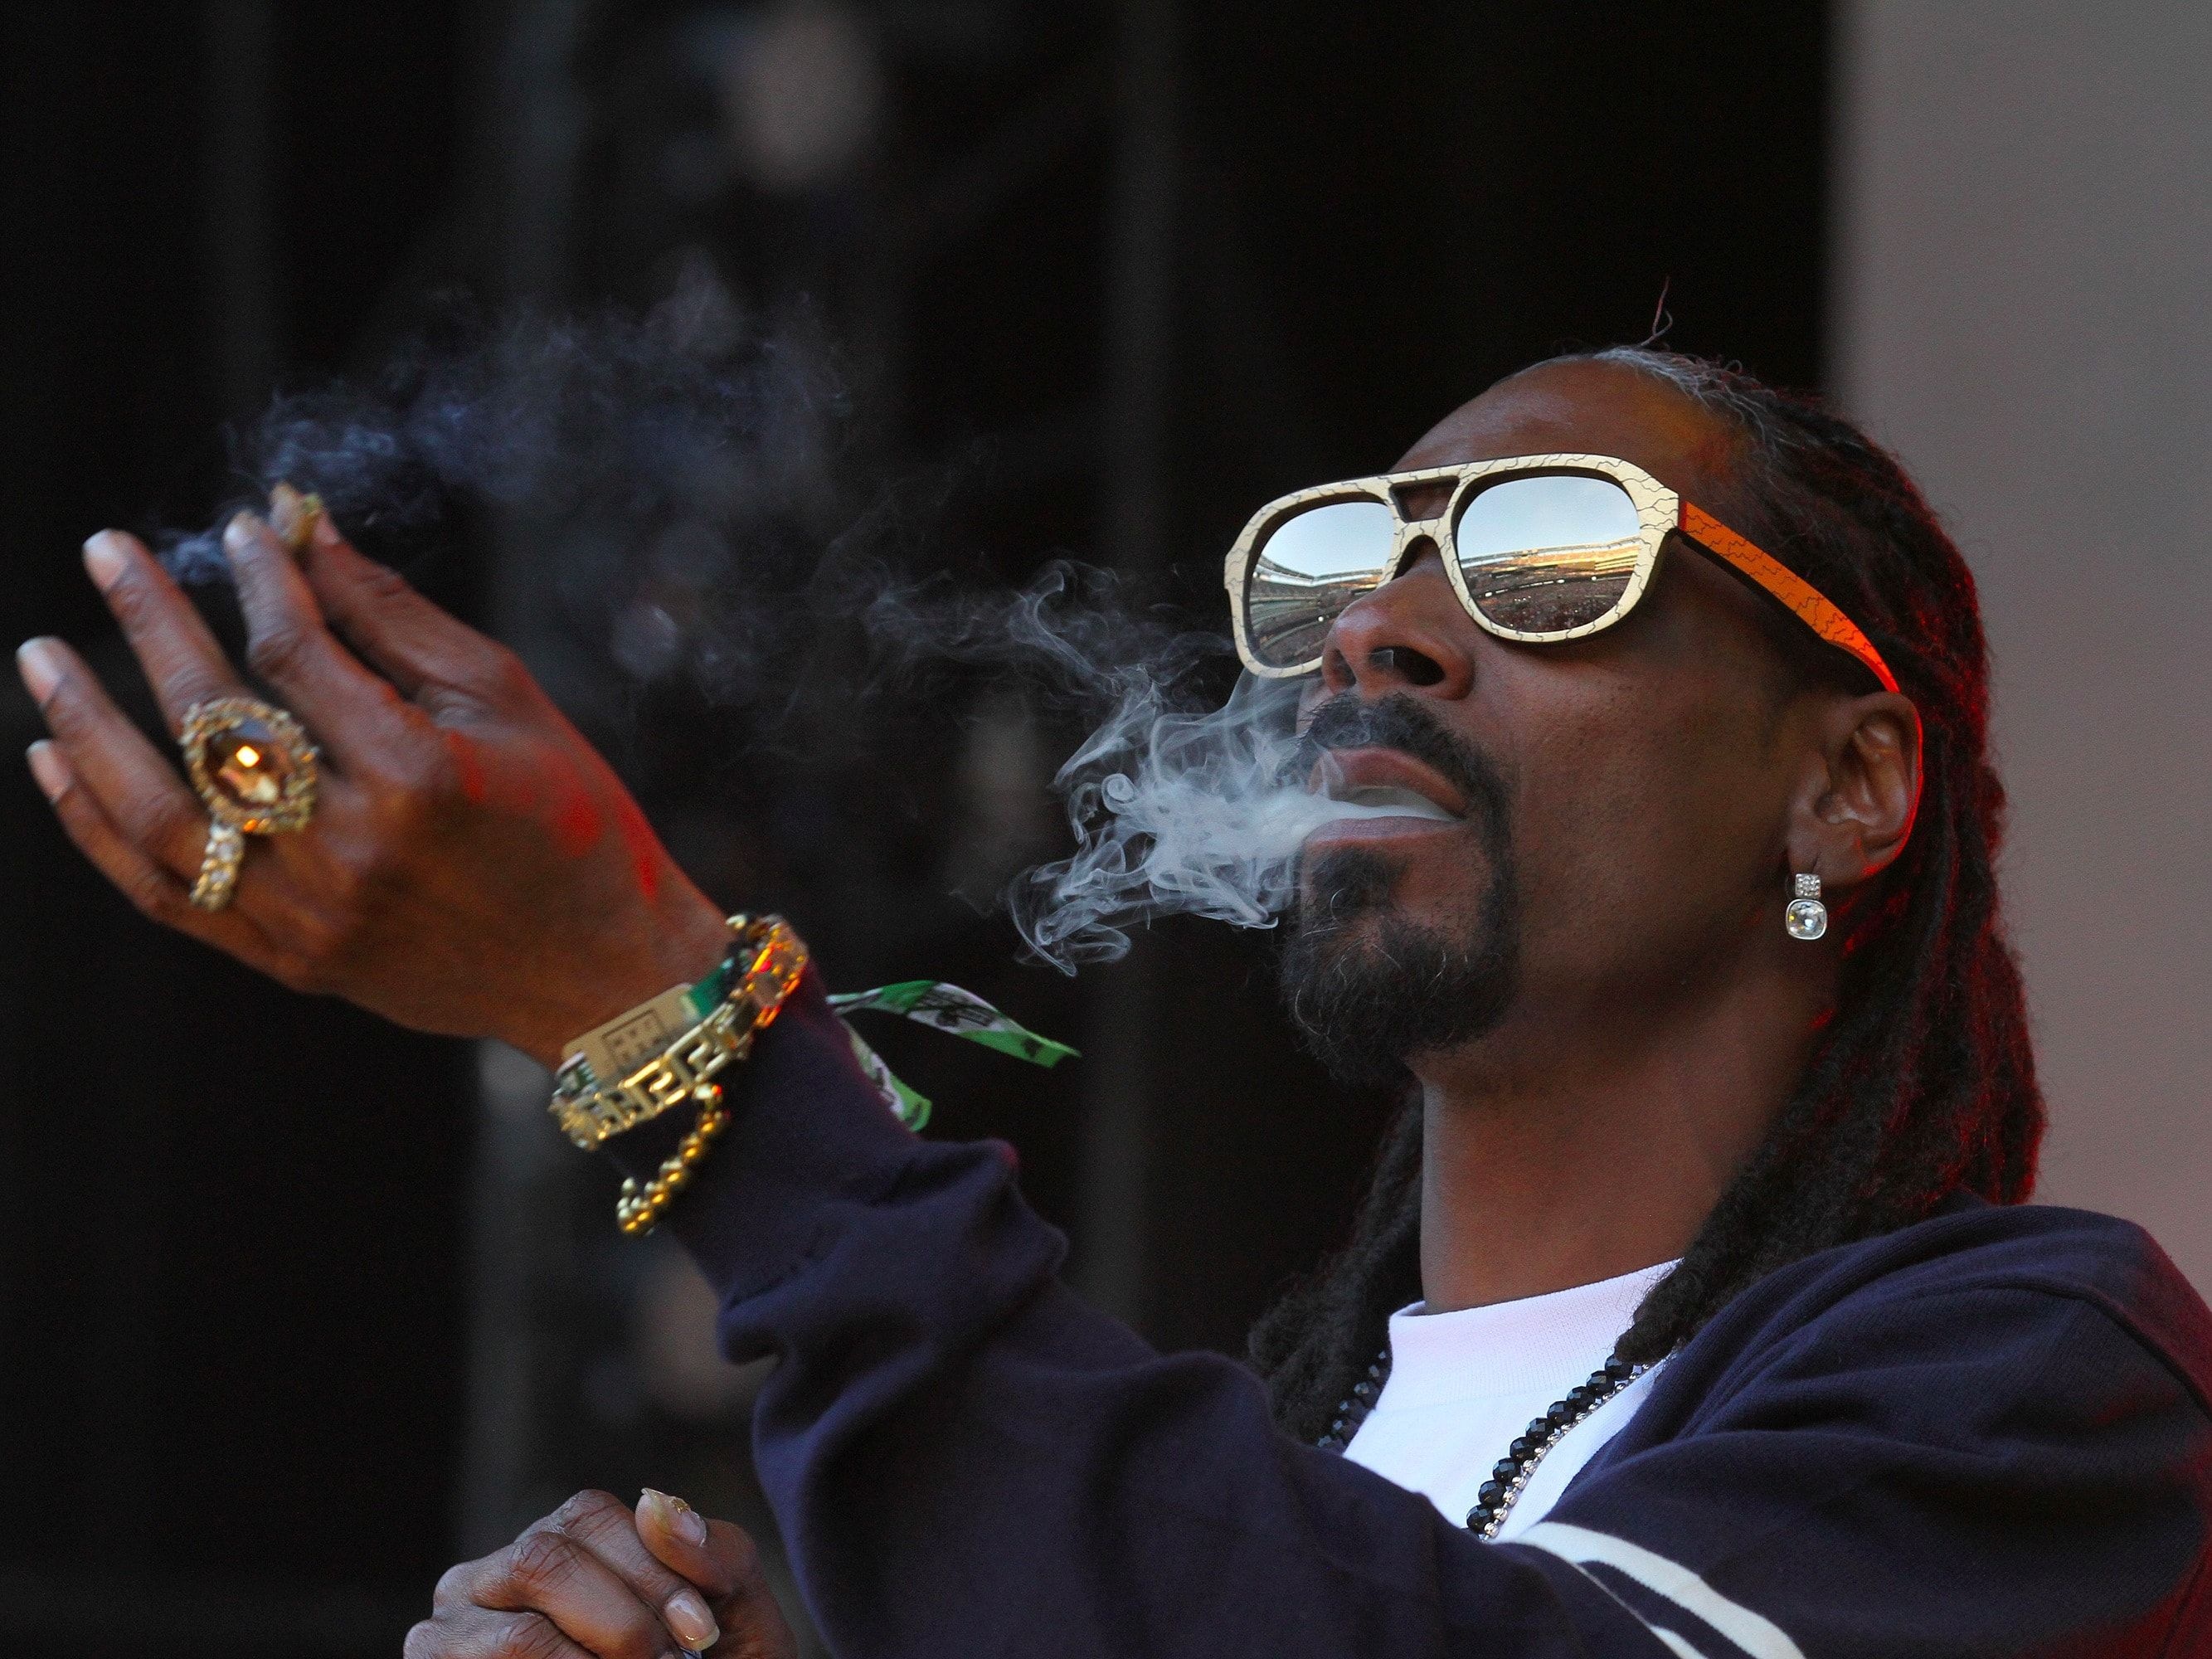 Snoop Dogg, HD wallpapers, Top backgrounds, High-quality images, 2670x2000 HD Desktop